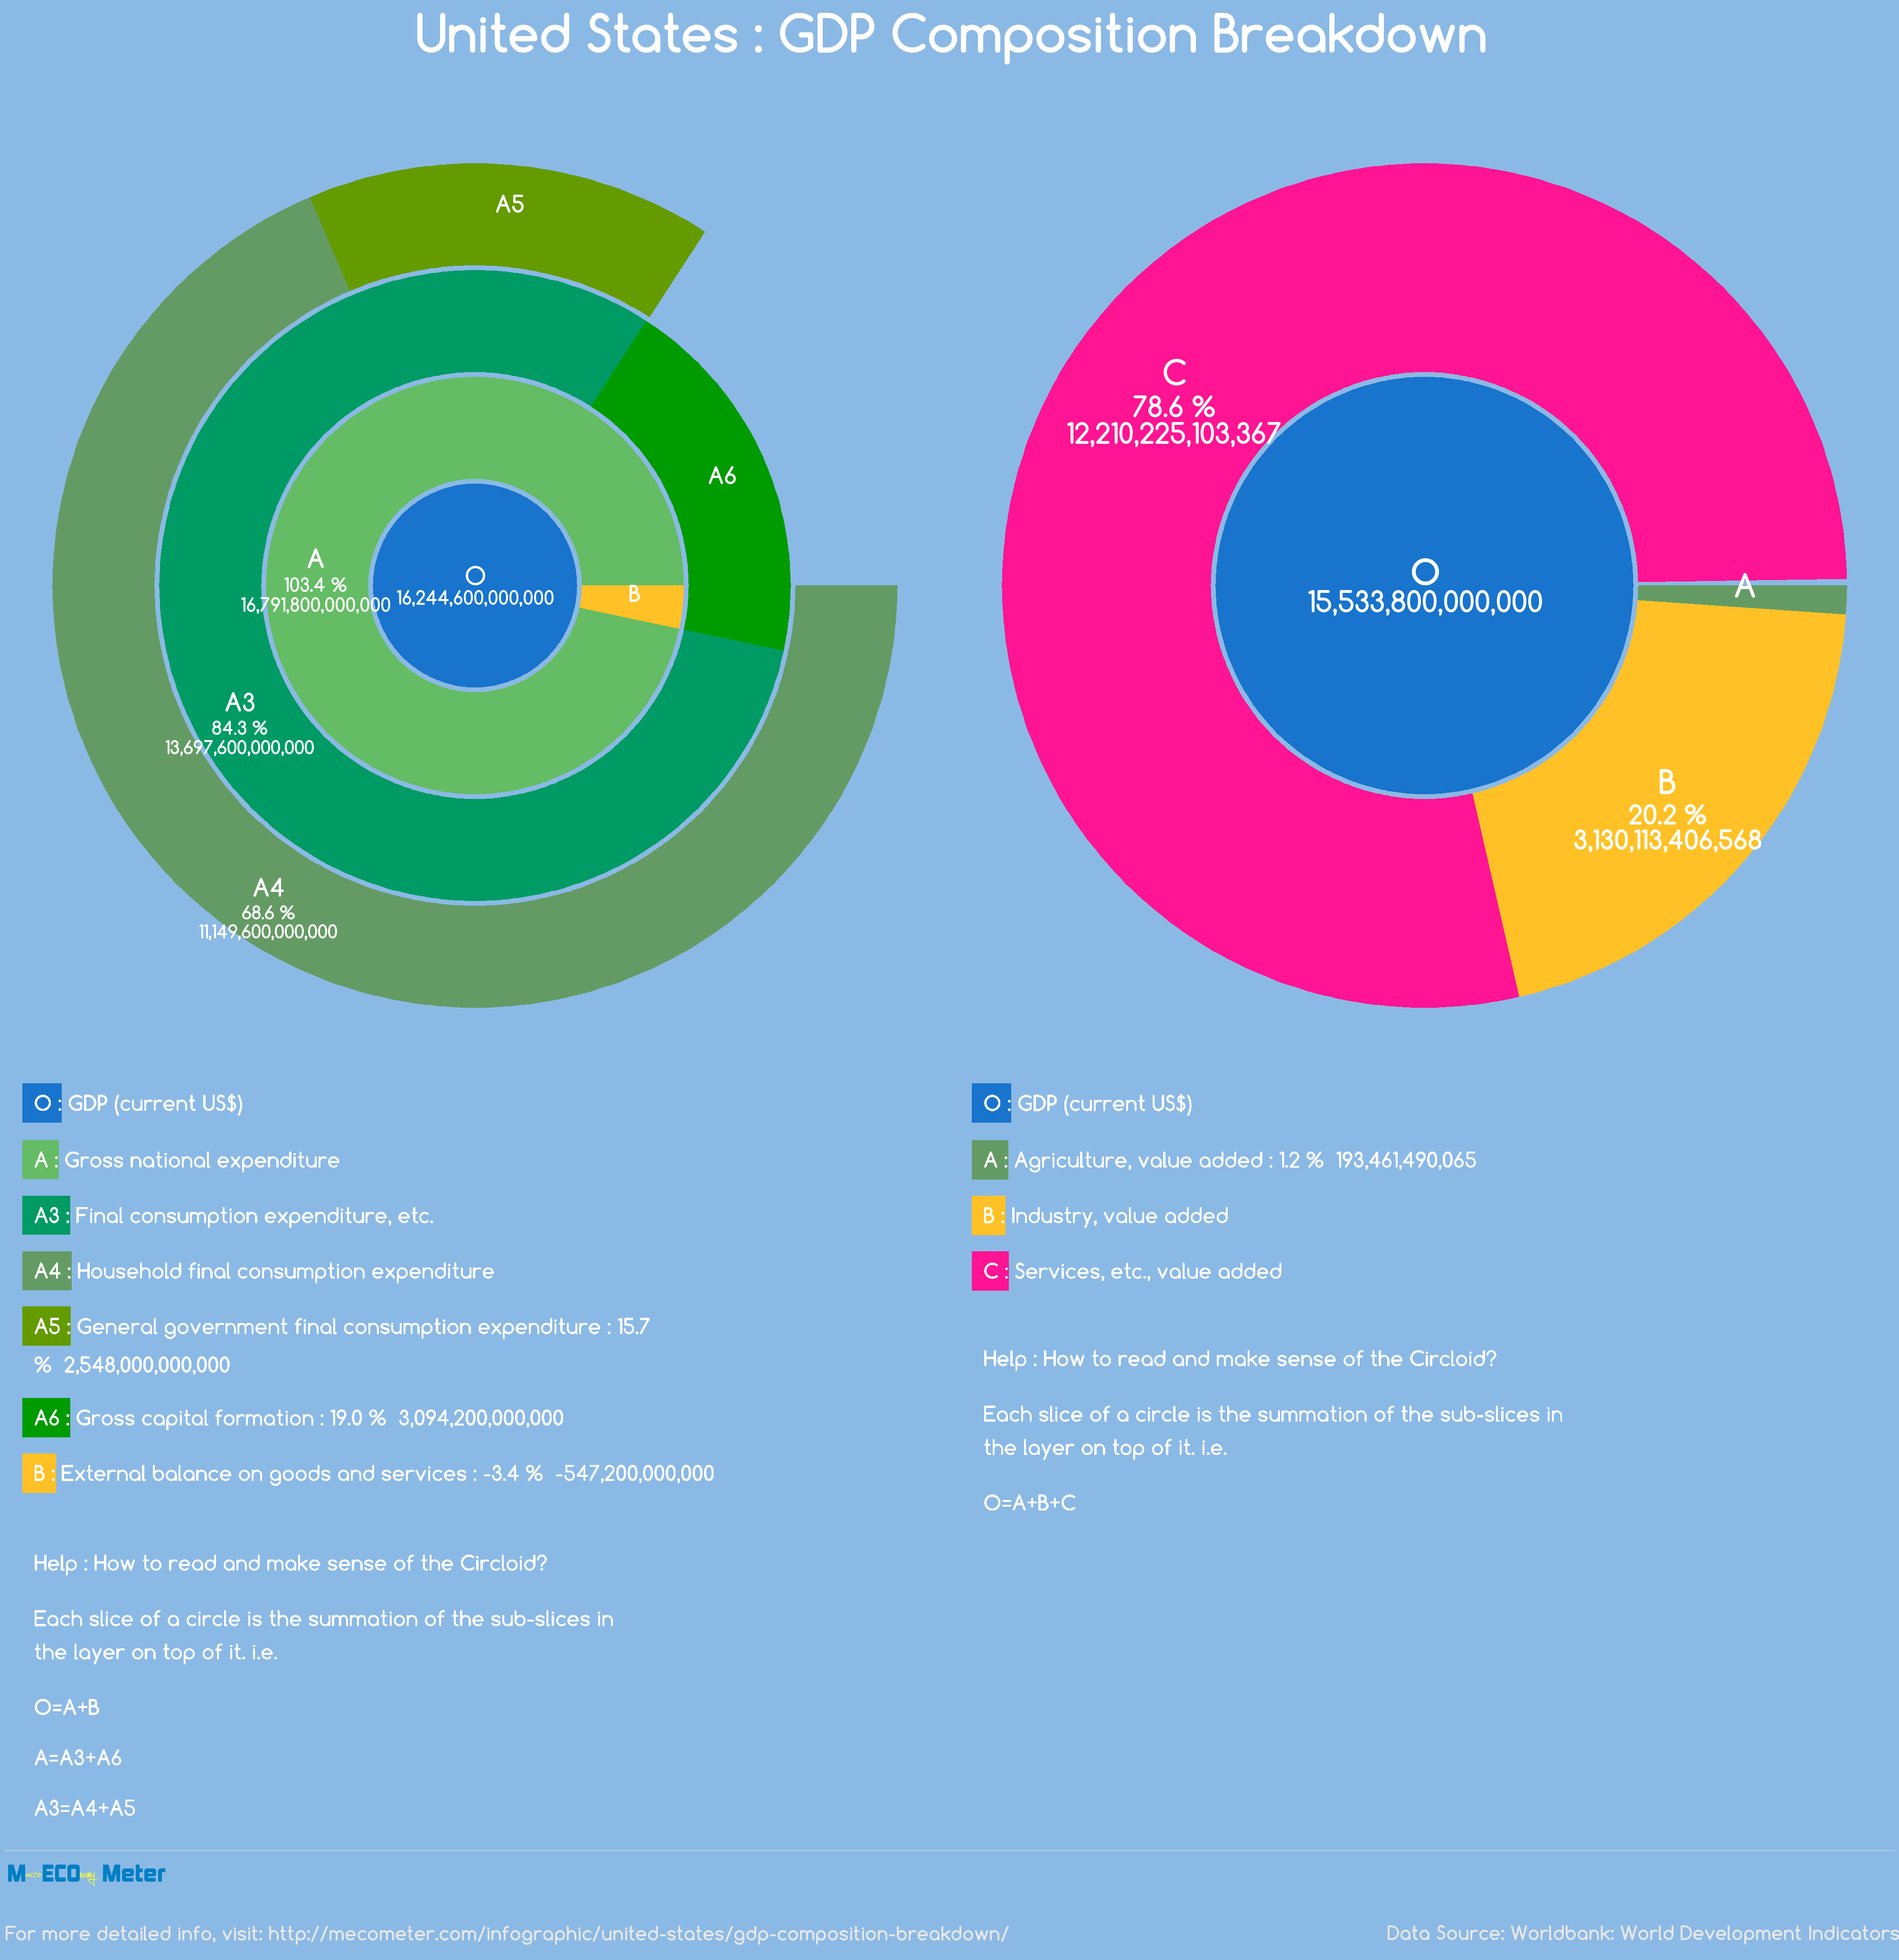 United States : GDP Composition Breakdown